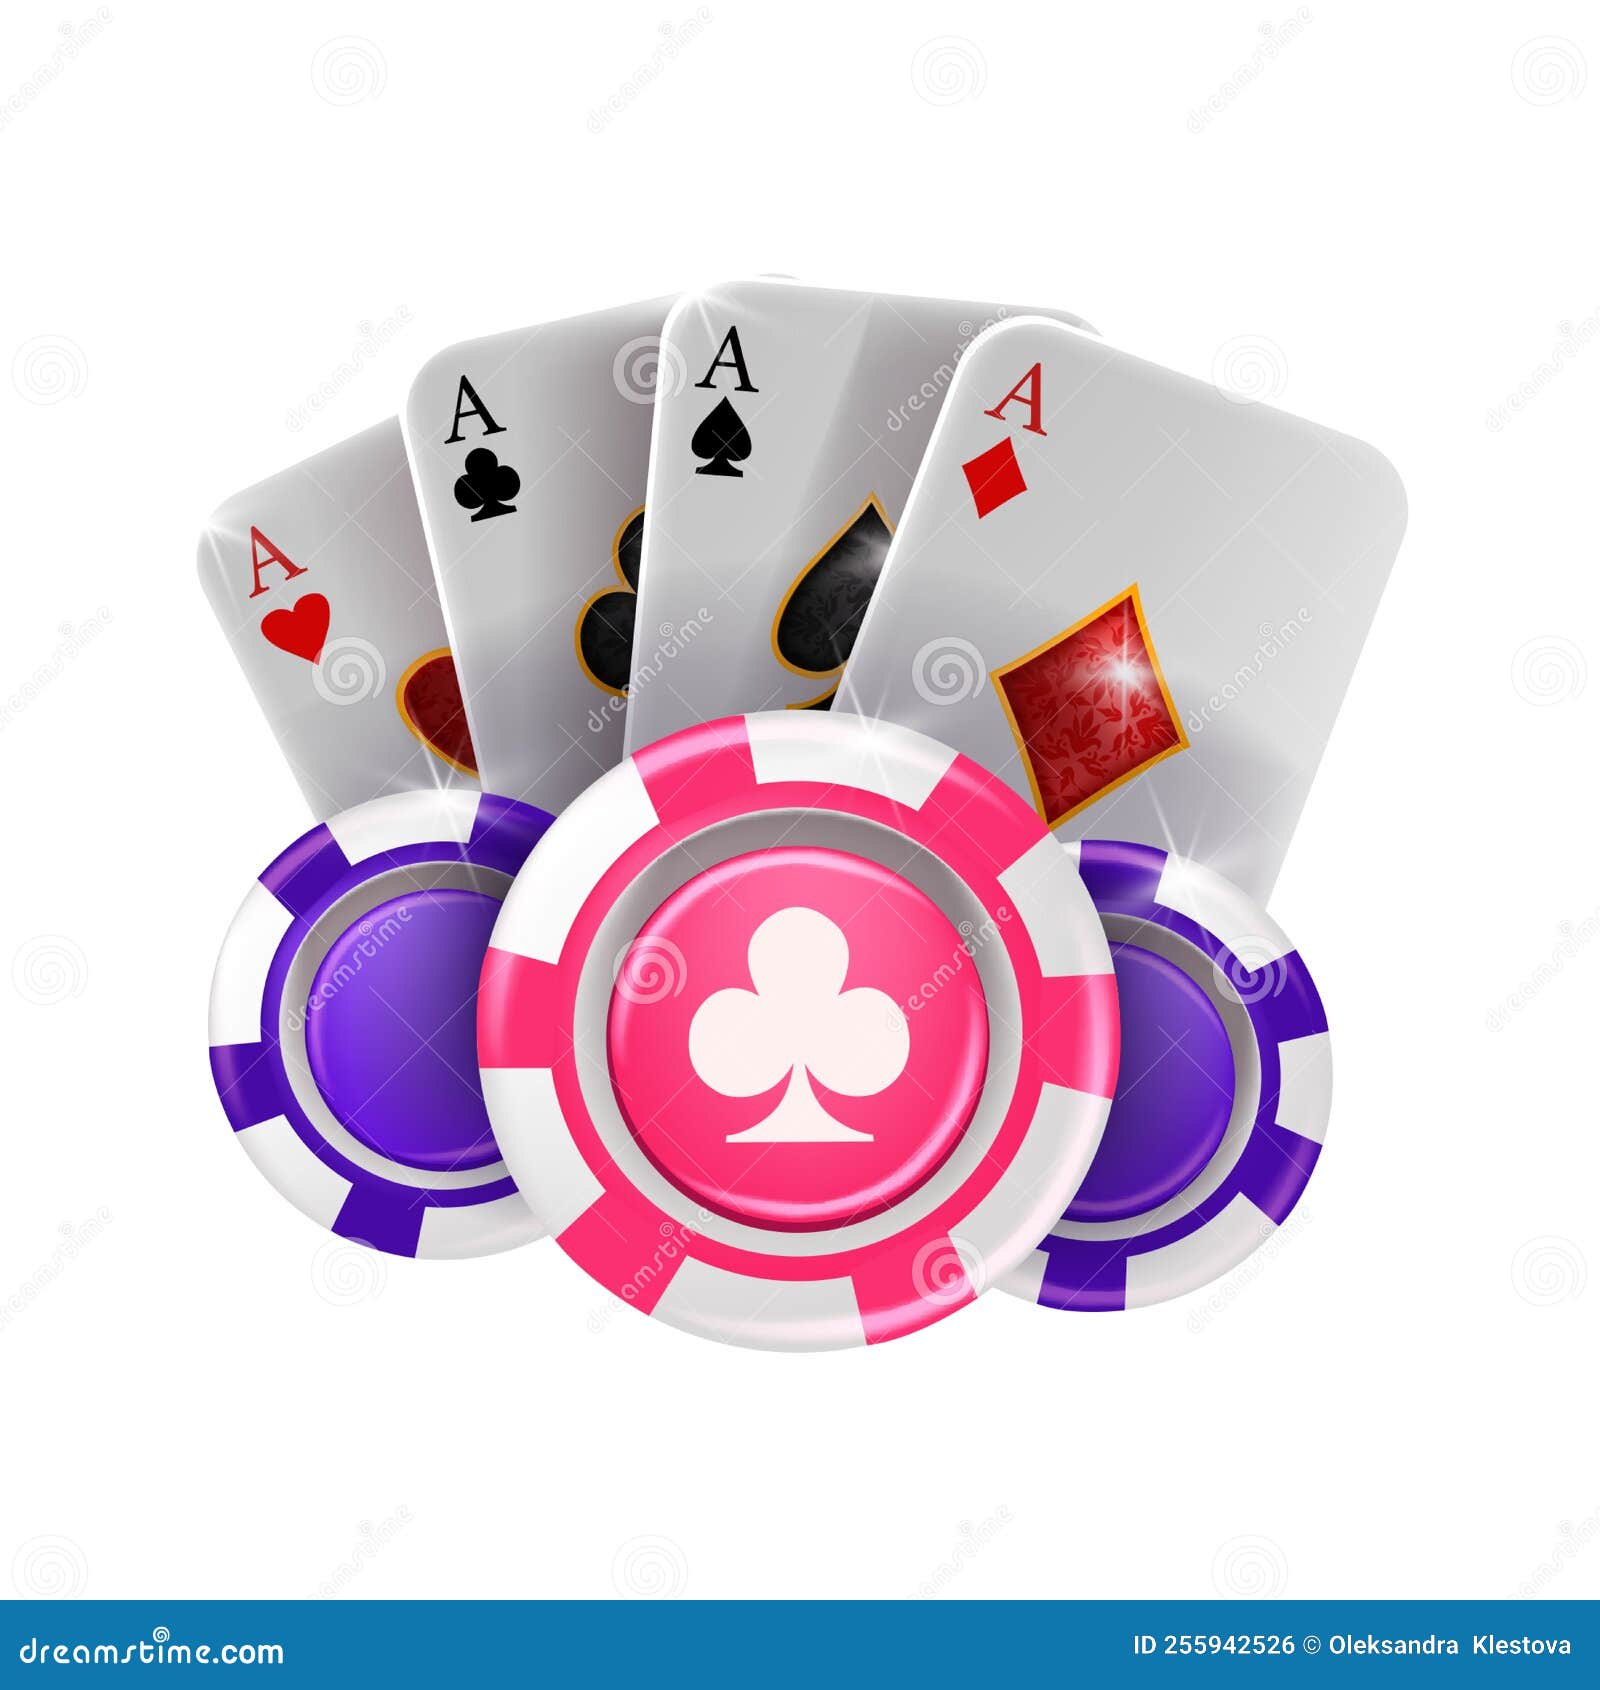 Casino Poker 3D Vector Icon, Vegas Tournament Banner, Playing Ace Card,  Flying Gambling Chips. Stock Vector - Illustration of chip, texas: 255942526